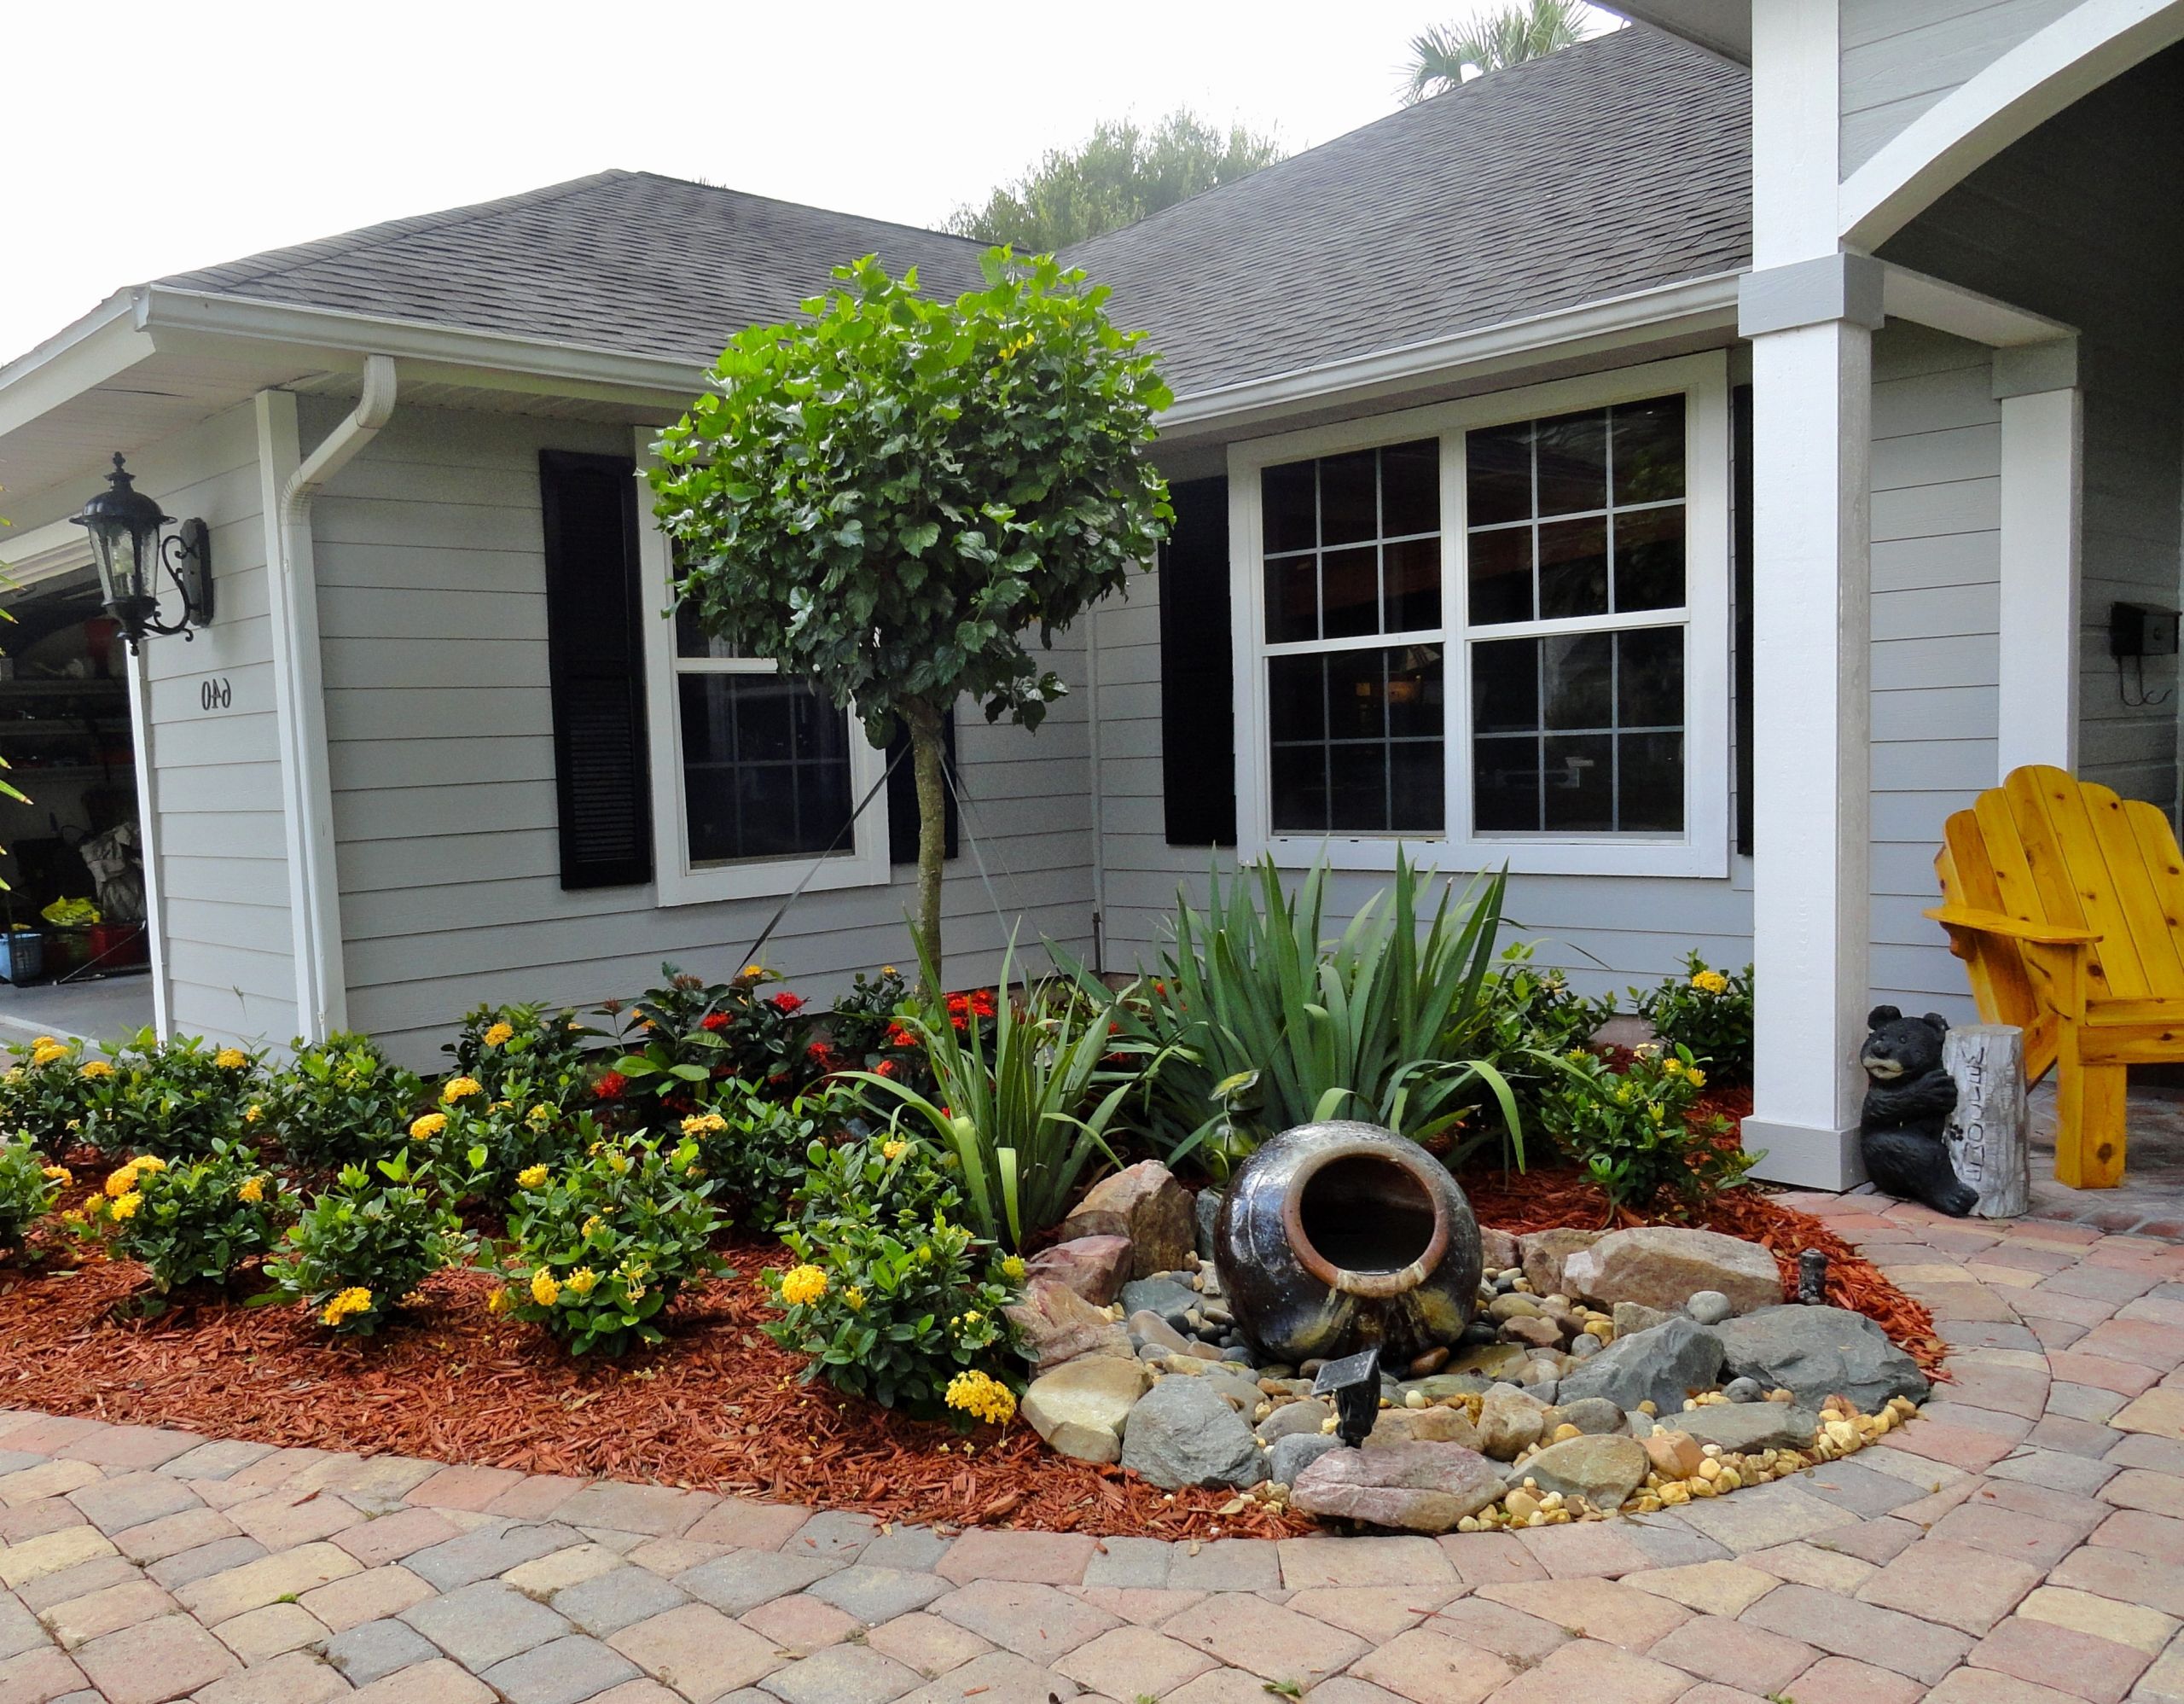 Landscape For Small Front Yards
 landscape ideas houston Luxury exterior landscaping ideas